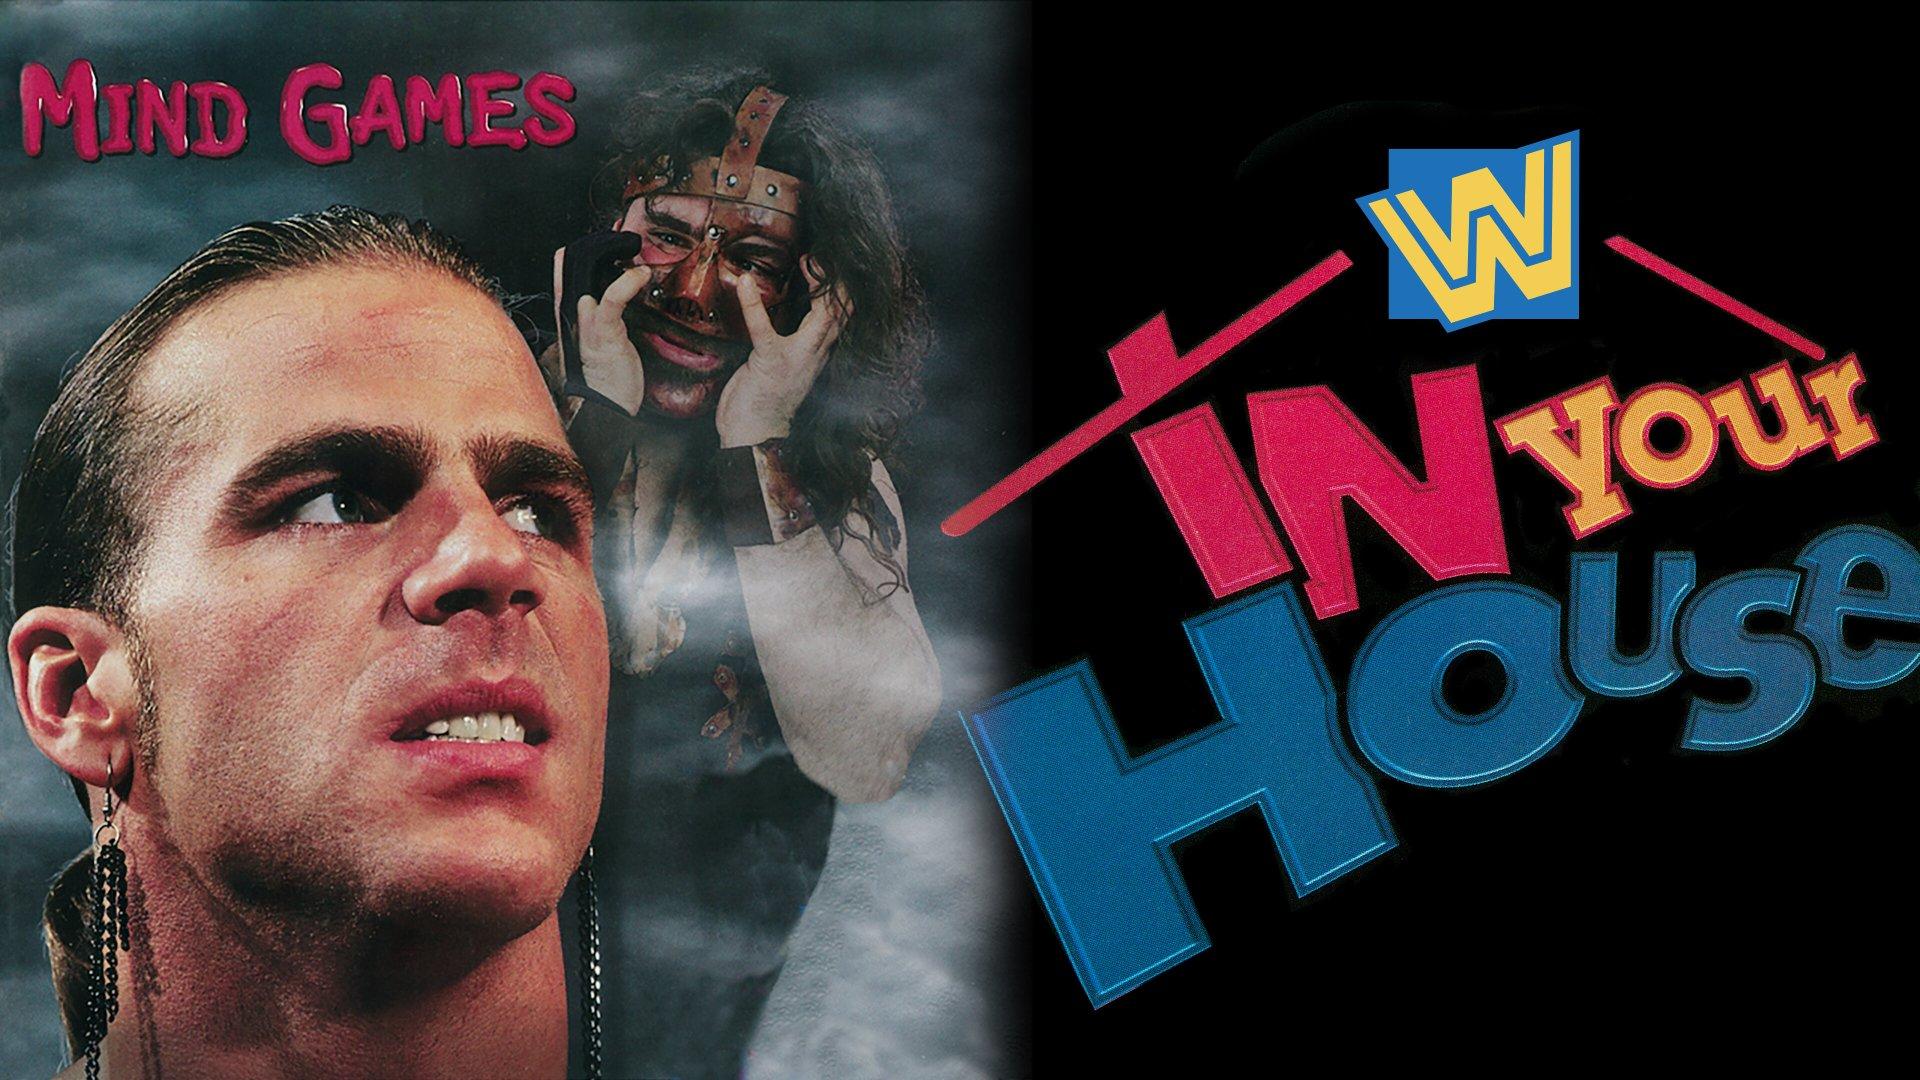 WWE In Your House: Mind Games